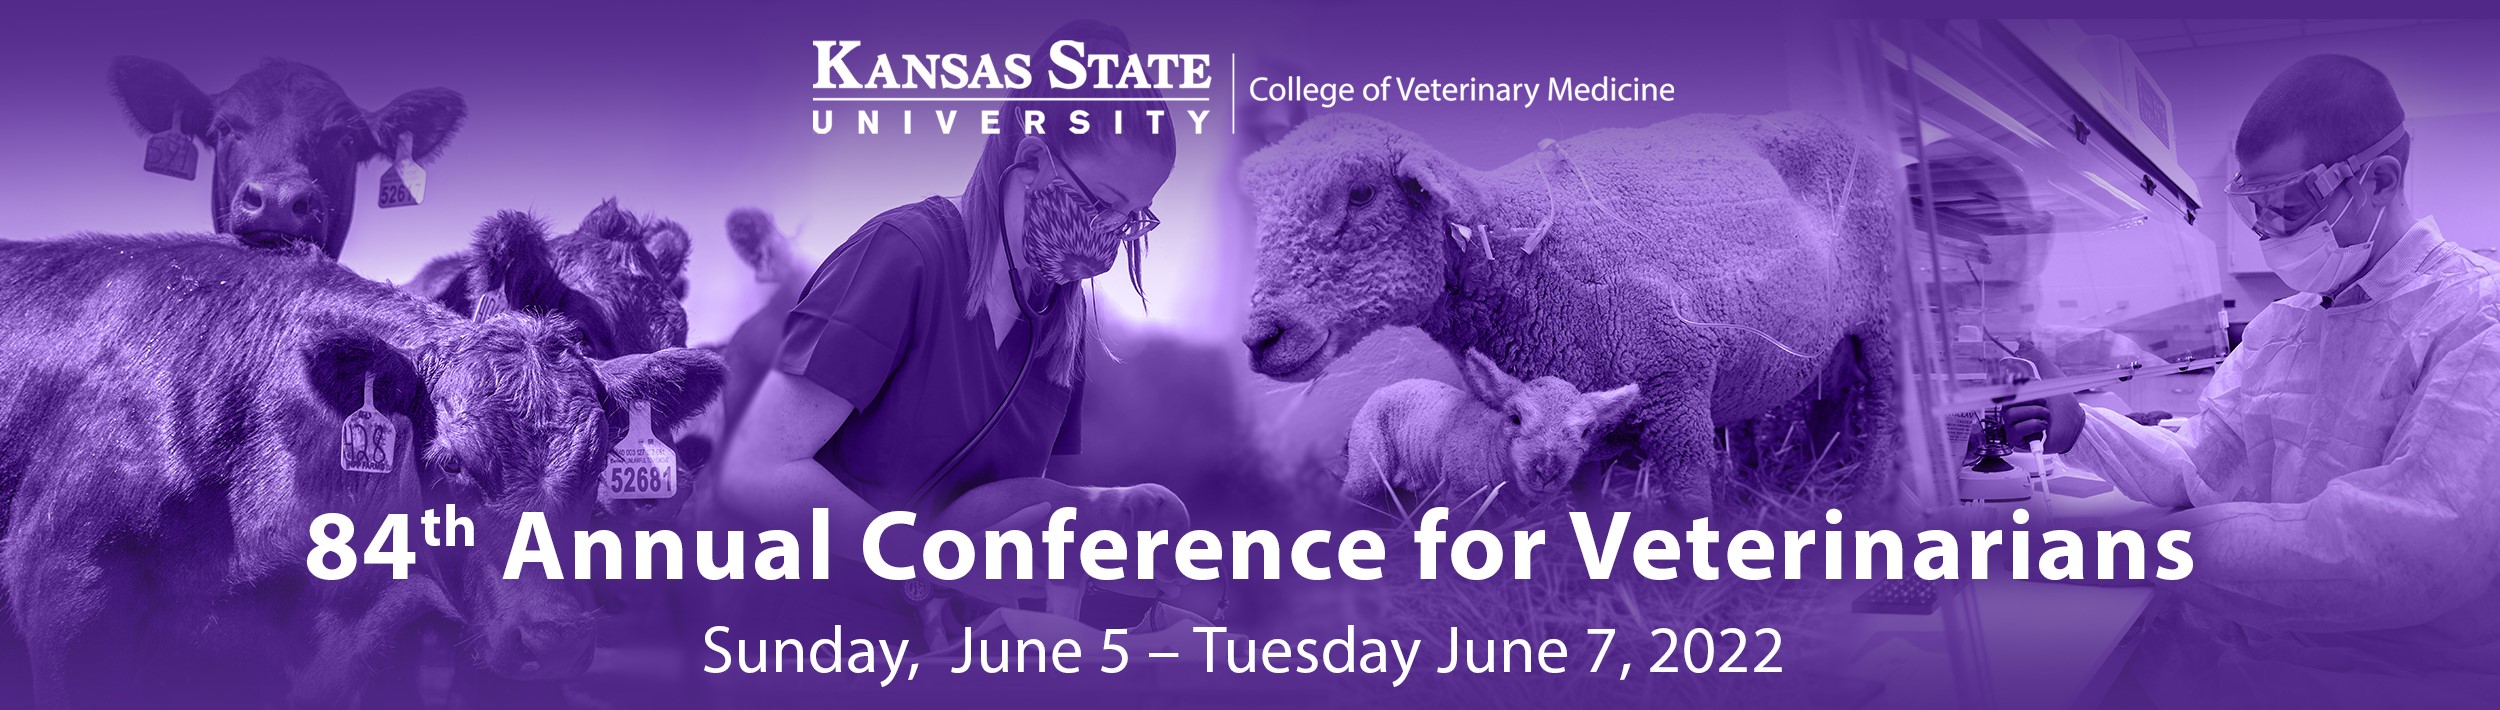 84th Annual Conference for Veterinarians